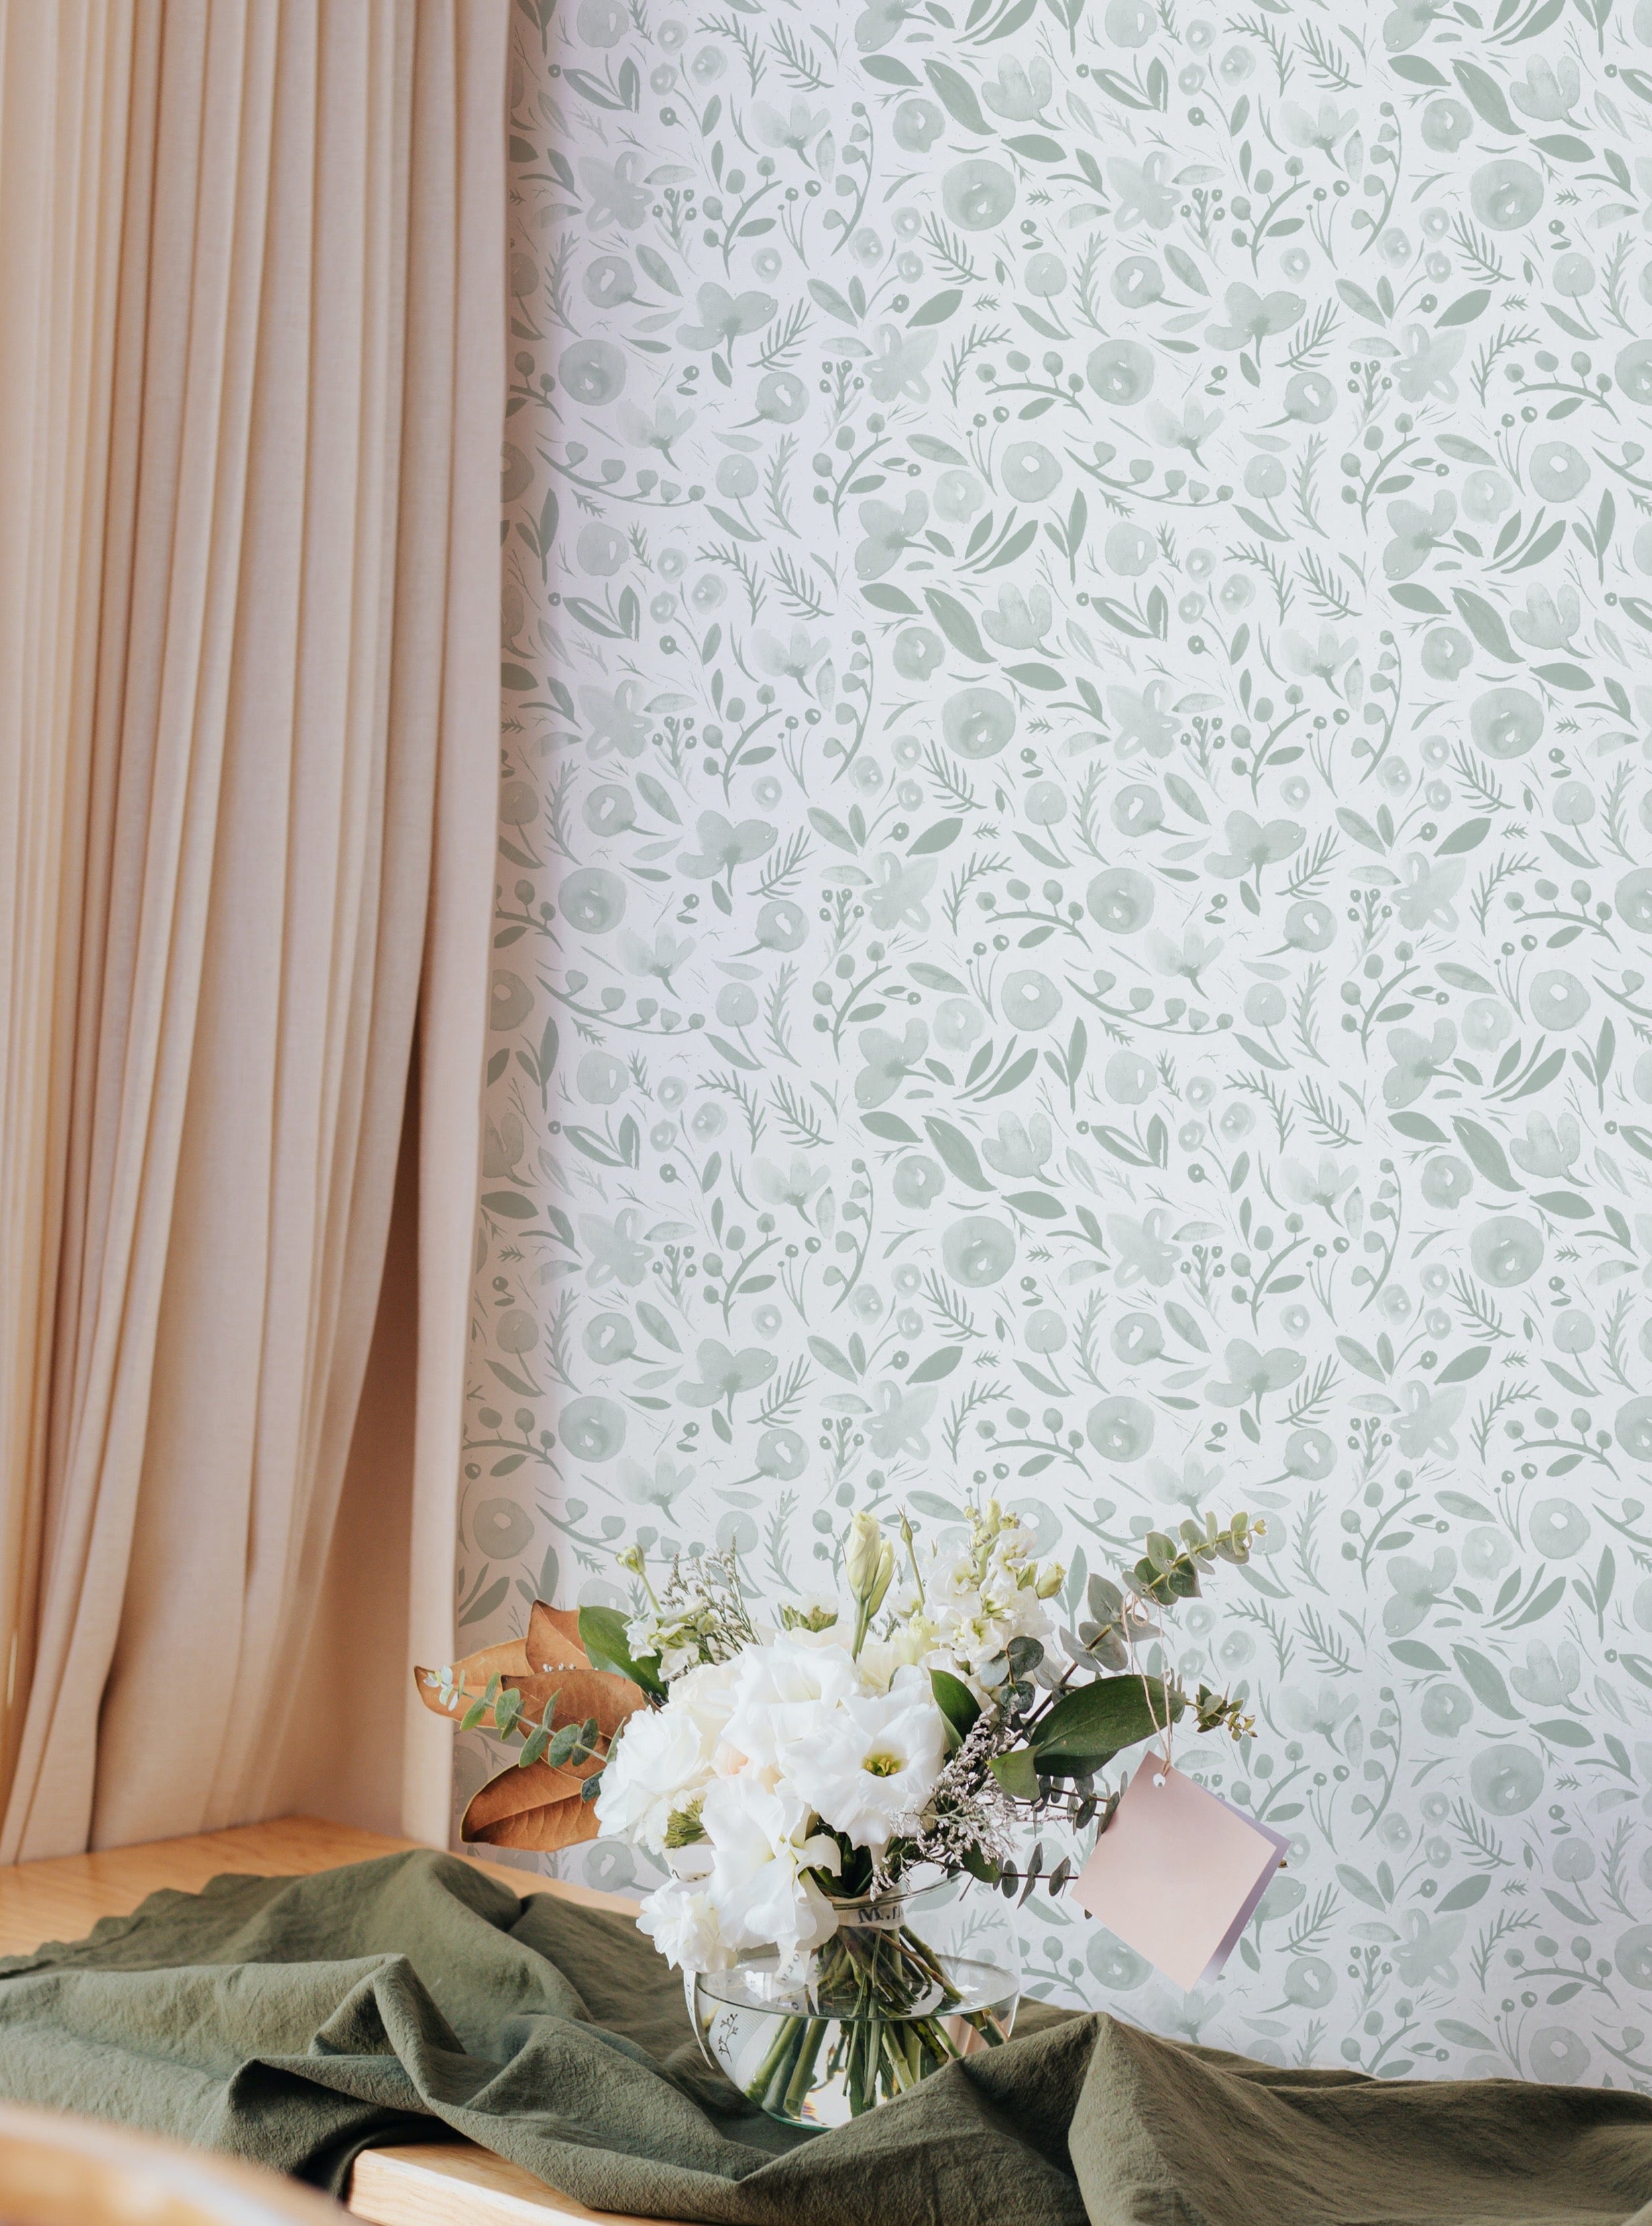 A serene corner setup featuring the Botanica Wallpaper, which displays a delicate botanical pattern of light green foliage and small blooms on a soft white background. This wallpaper adds a fresh, airy feel to the space, complemented by a light floral arrangement and pastel-colored drapery.